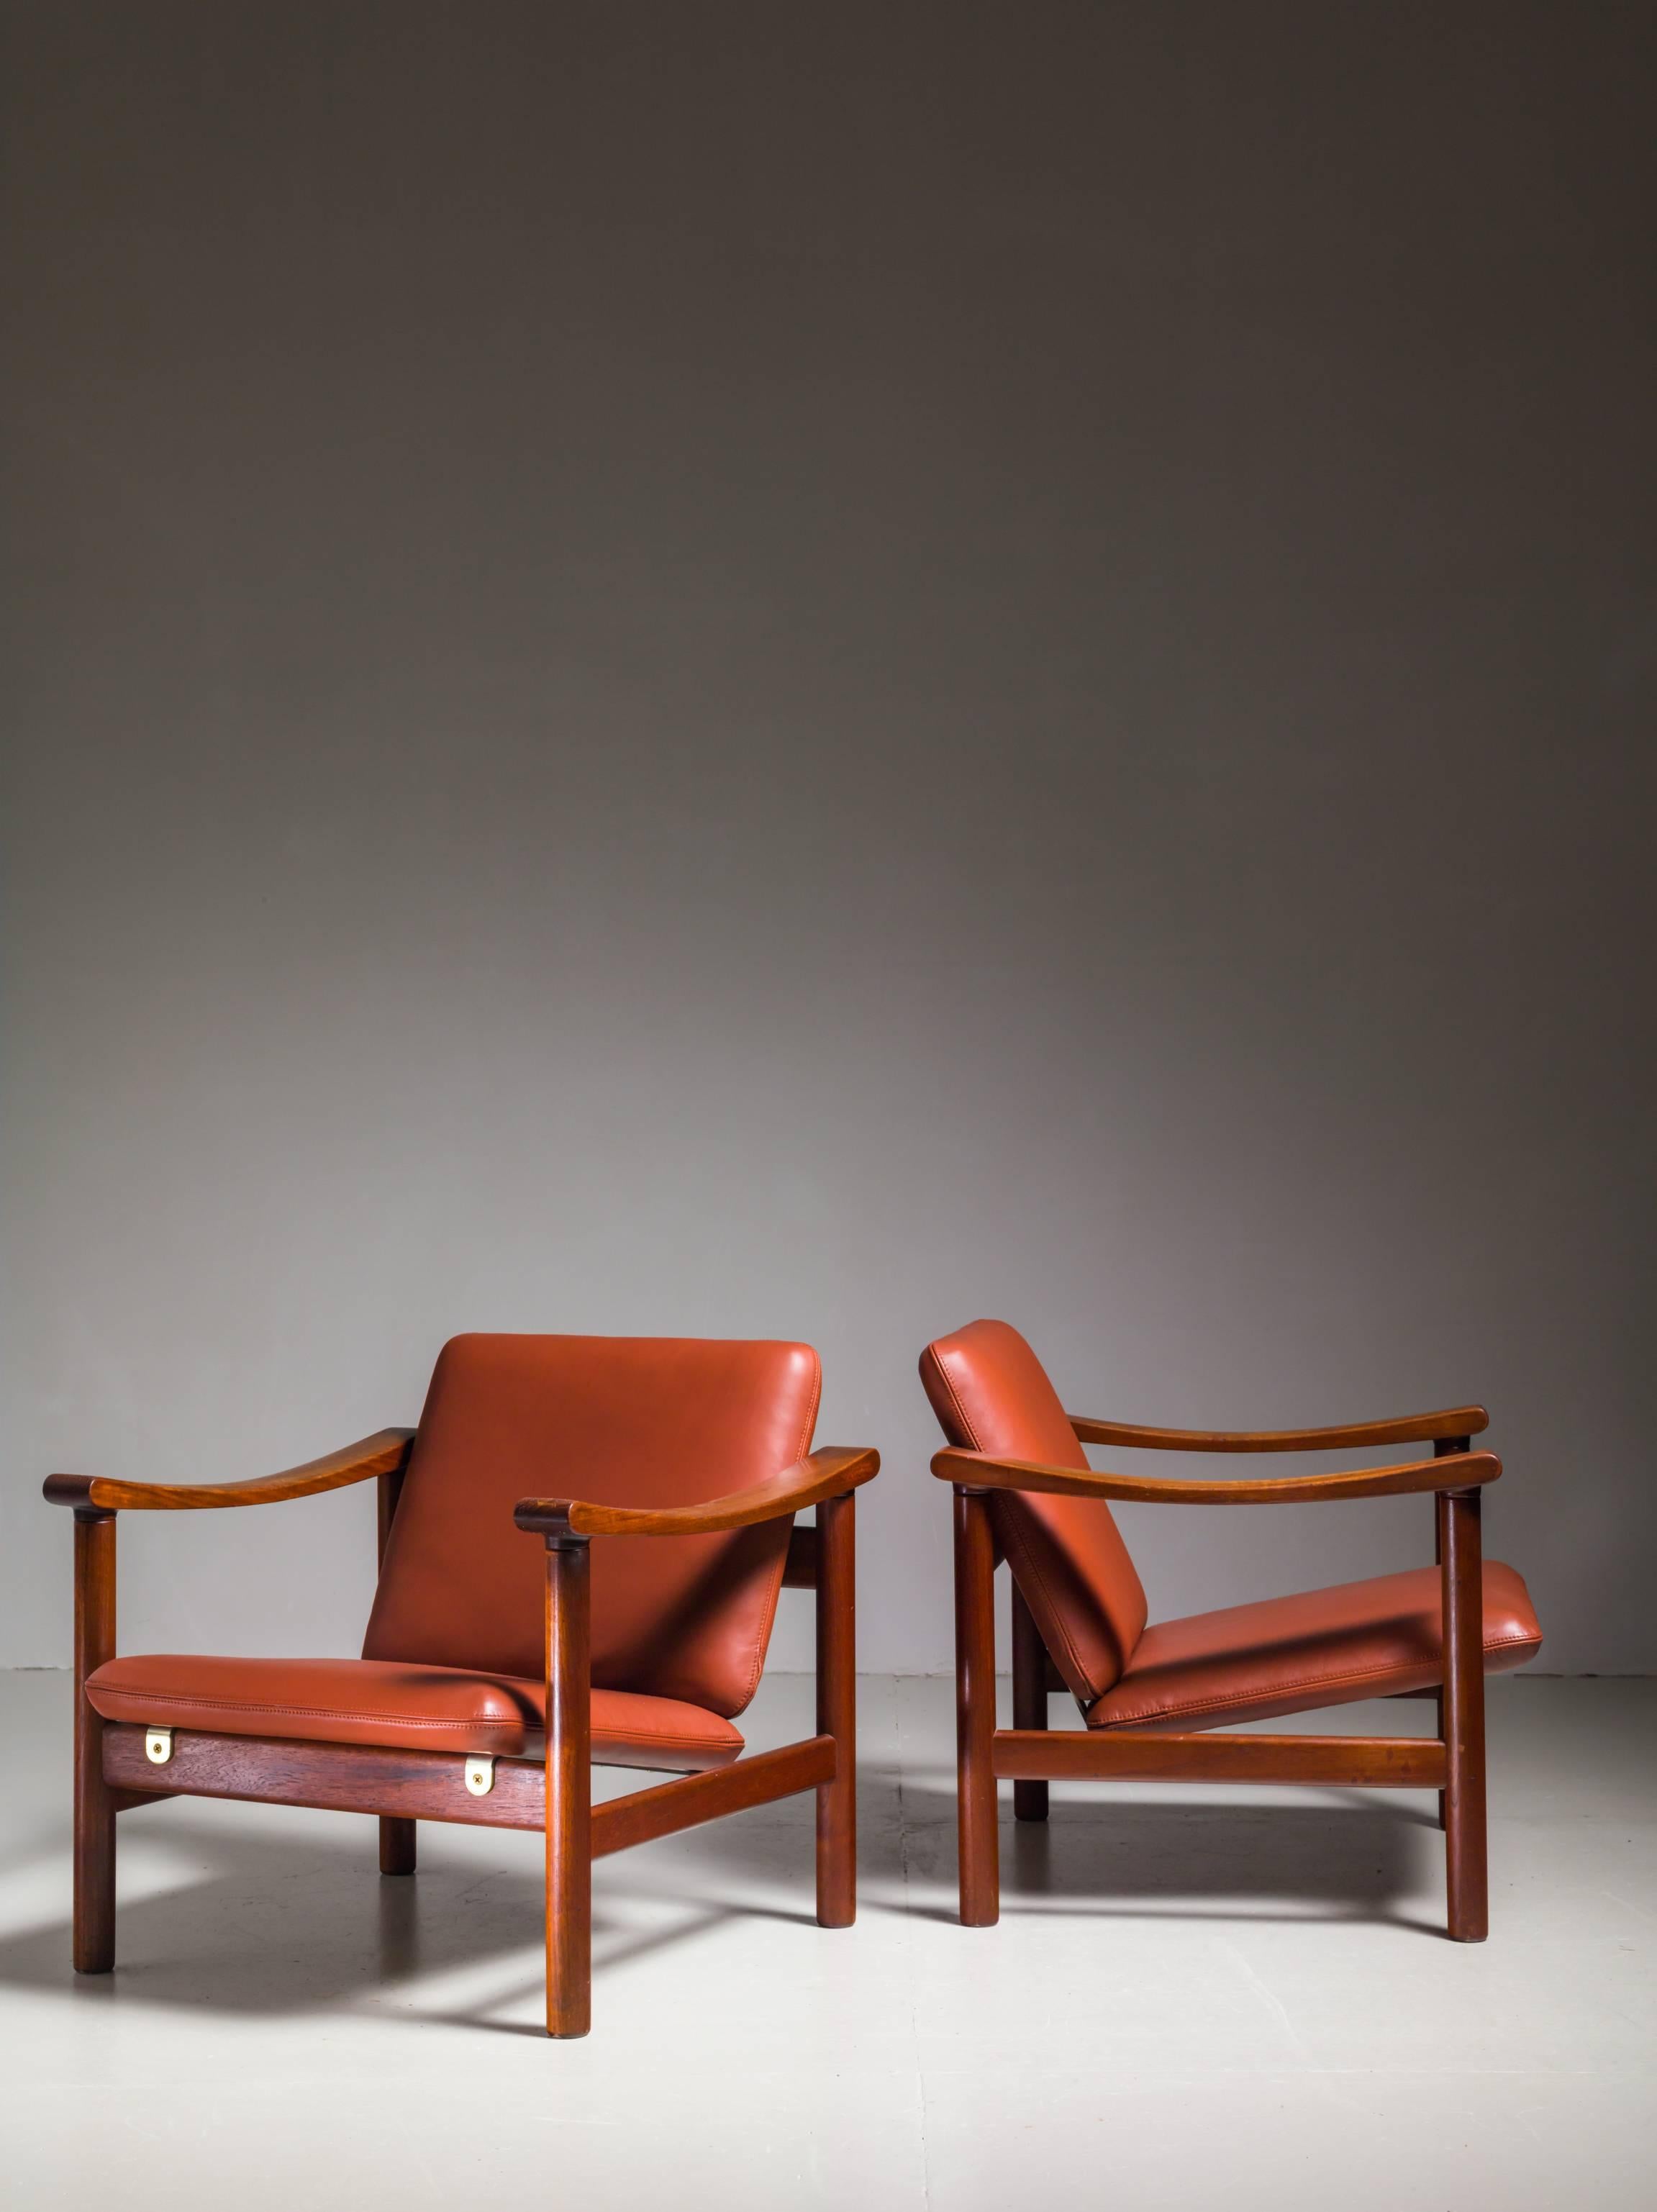 A pair of rare Hans Wegner lounge chairs for GETAMA. The chairs are made of a wooden frame, with a reclining seat and backrest, supported by metal rails.
The chairs were professionally reupholstered in our atelier with a beautiful brown leather.
